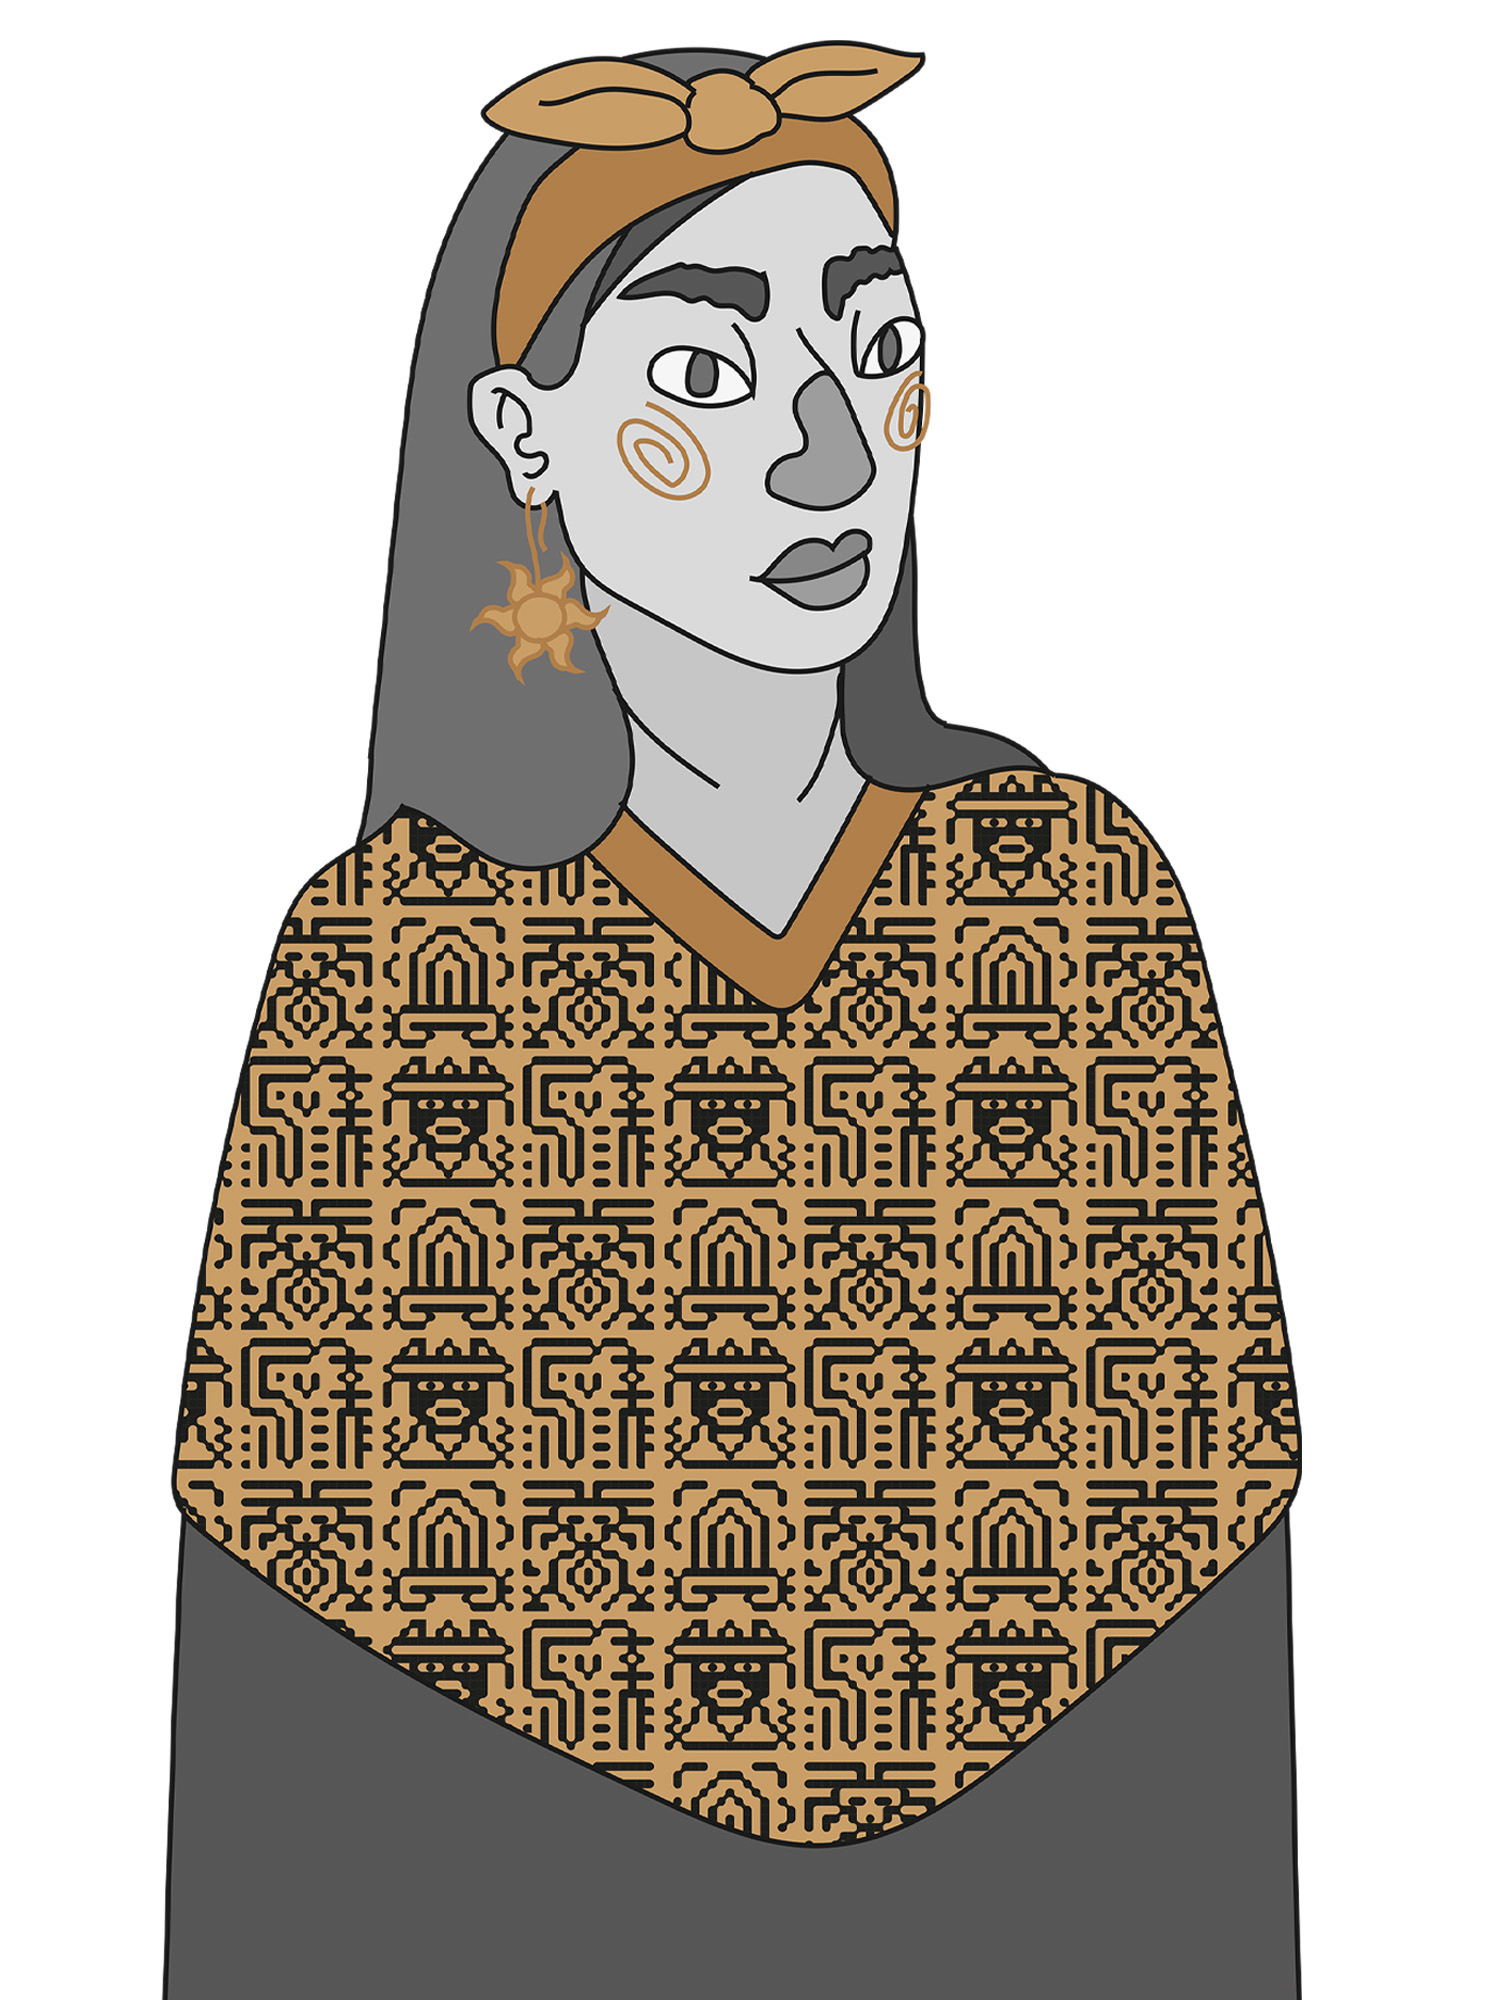 Illustrated Mexican woman wearing patterned clothing